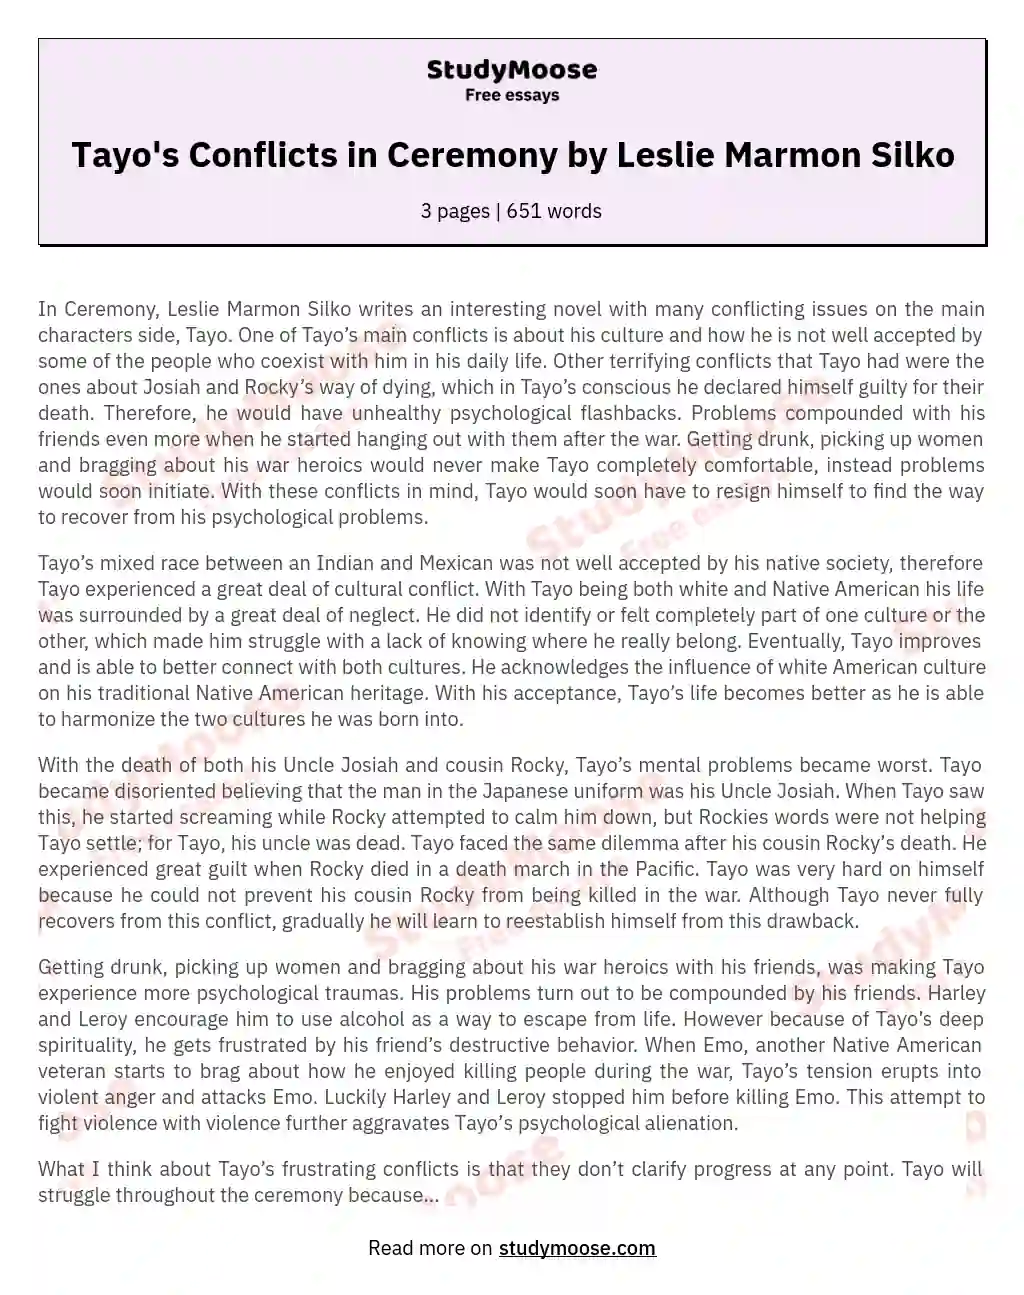 Tayo's Conflicts in Ceremony by Leslie Marmon Silko essay